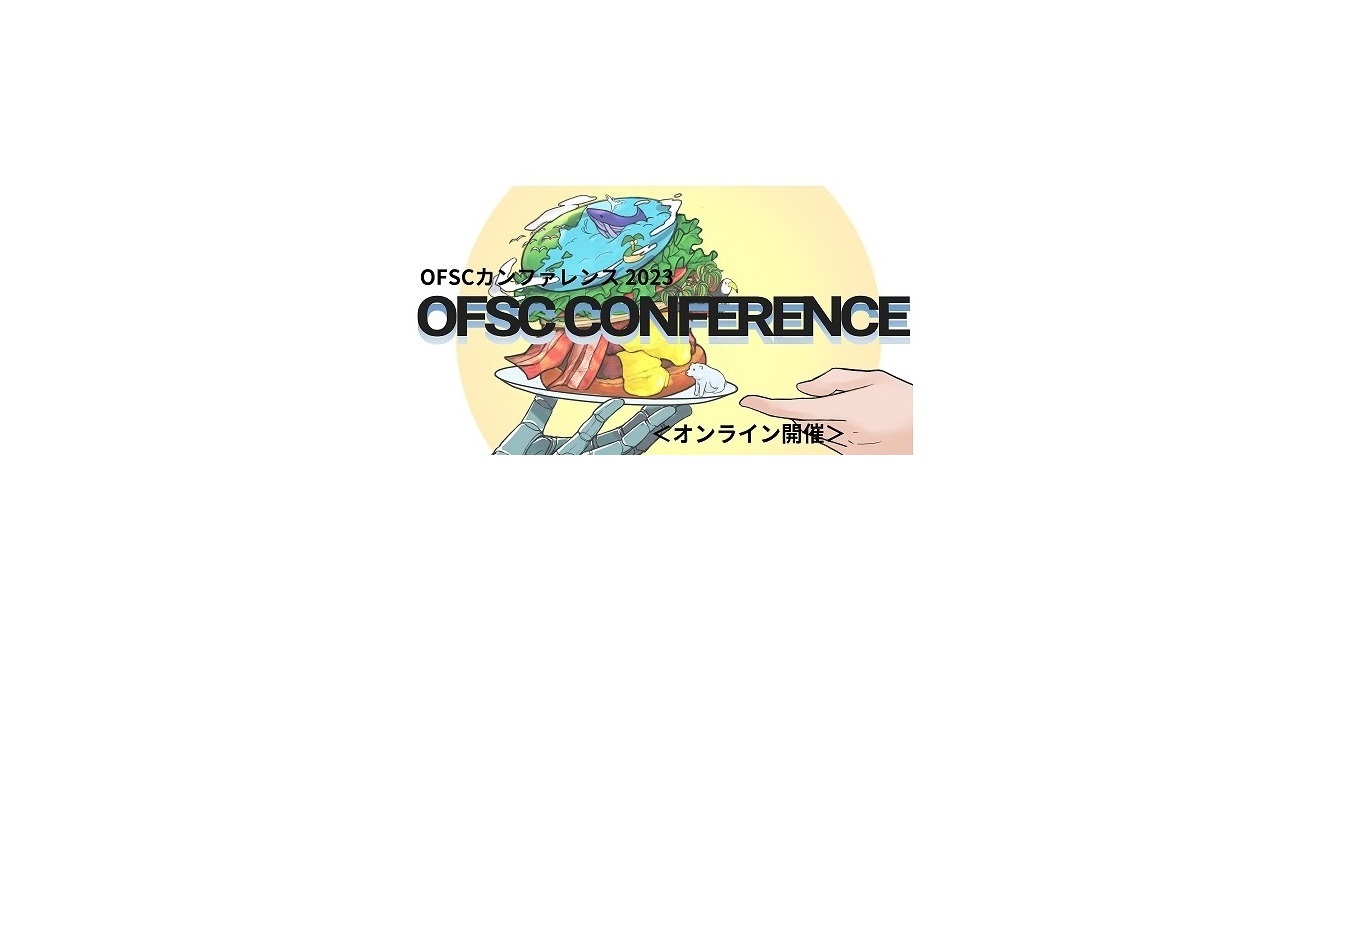 Conference of Open Foodservice System Consortium